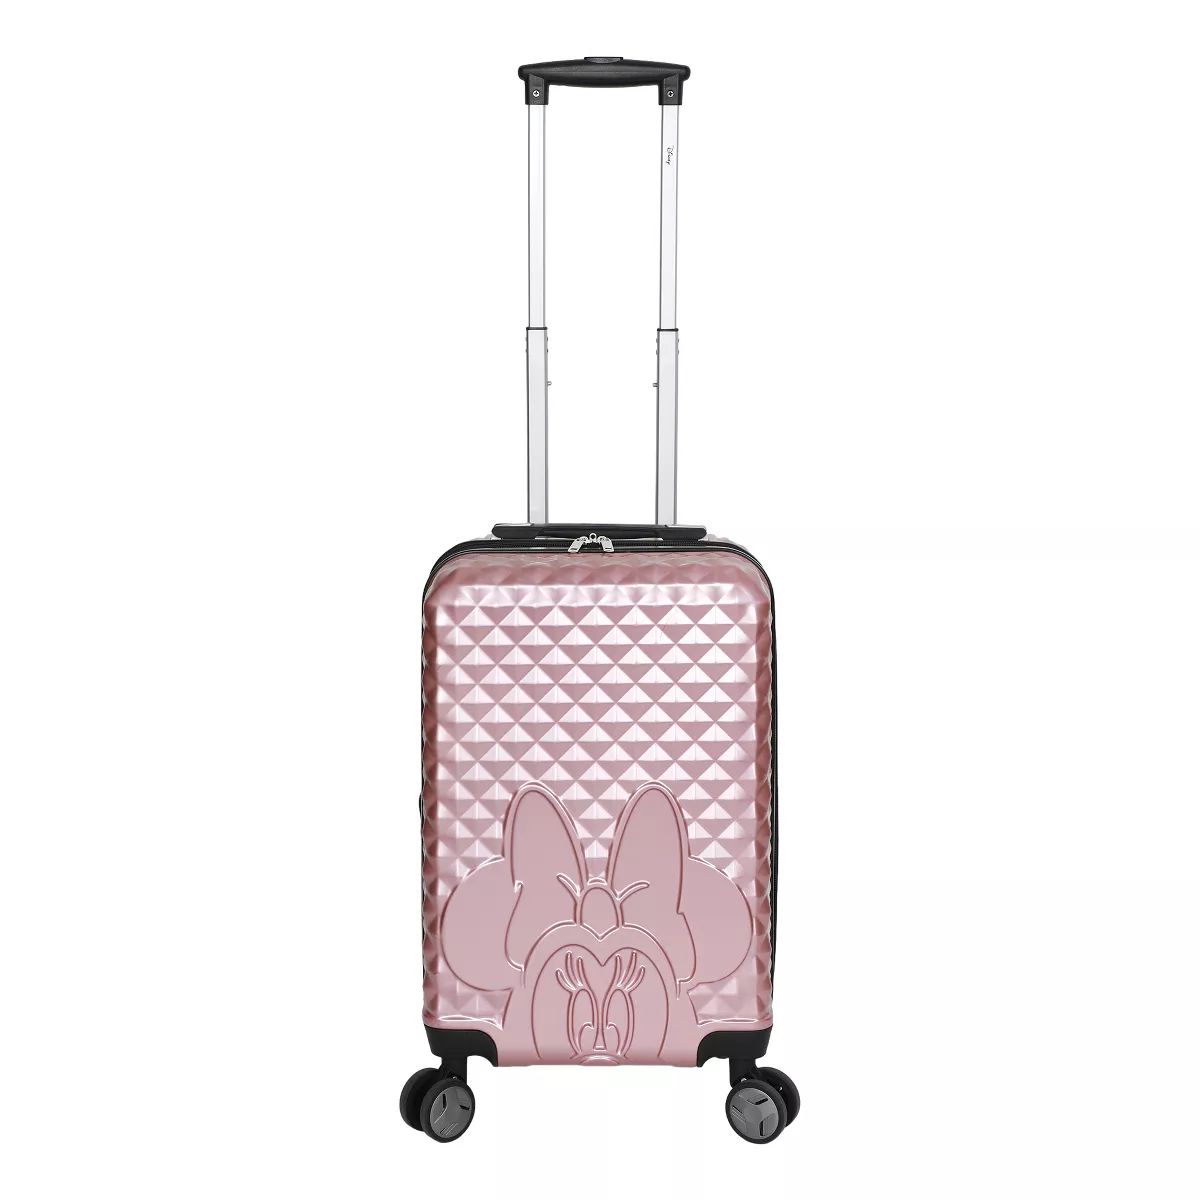 Disney Minnie Mouse Rose Gold 20” Carry-On Luggage With Wheels And Retractable Handle | Target